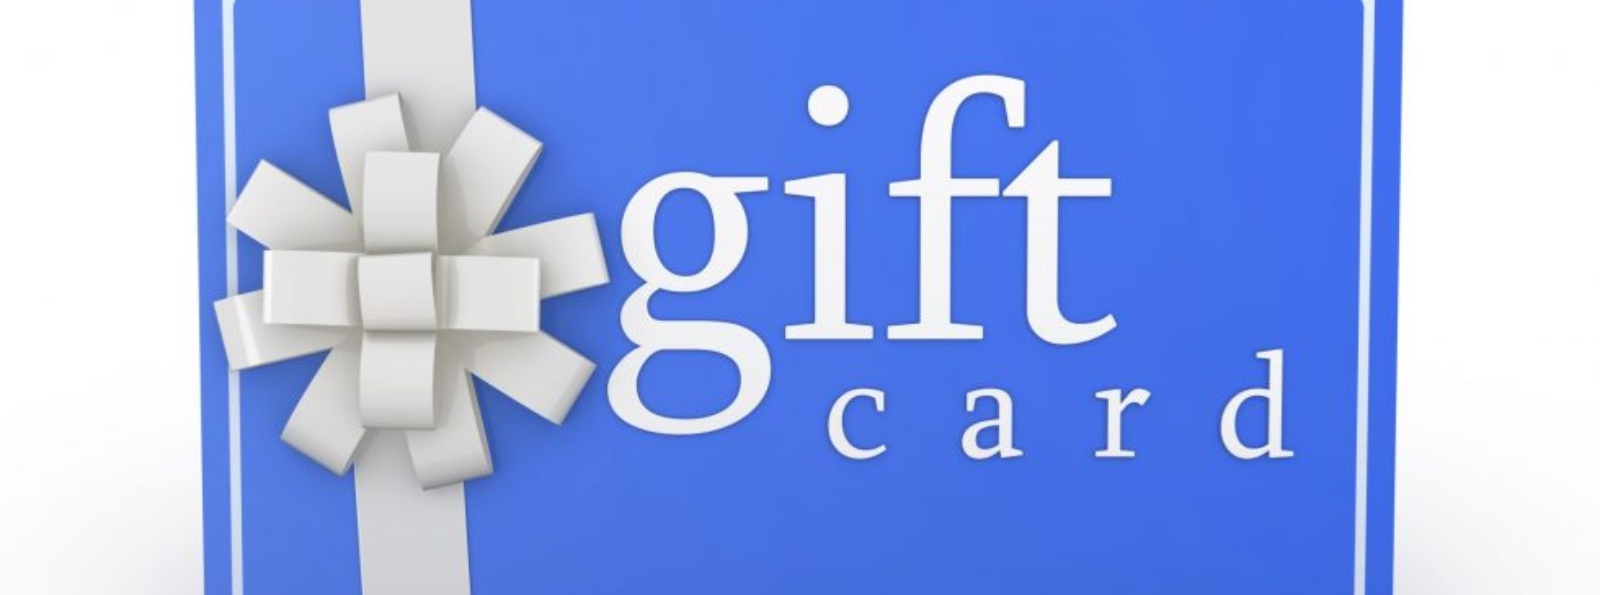 blue card with white text gift card